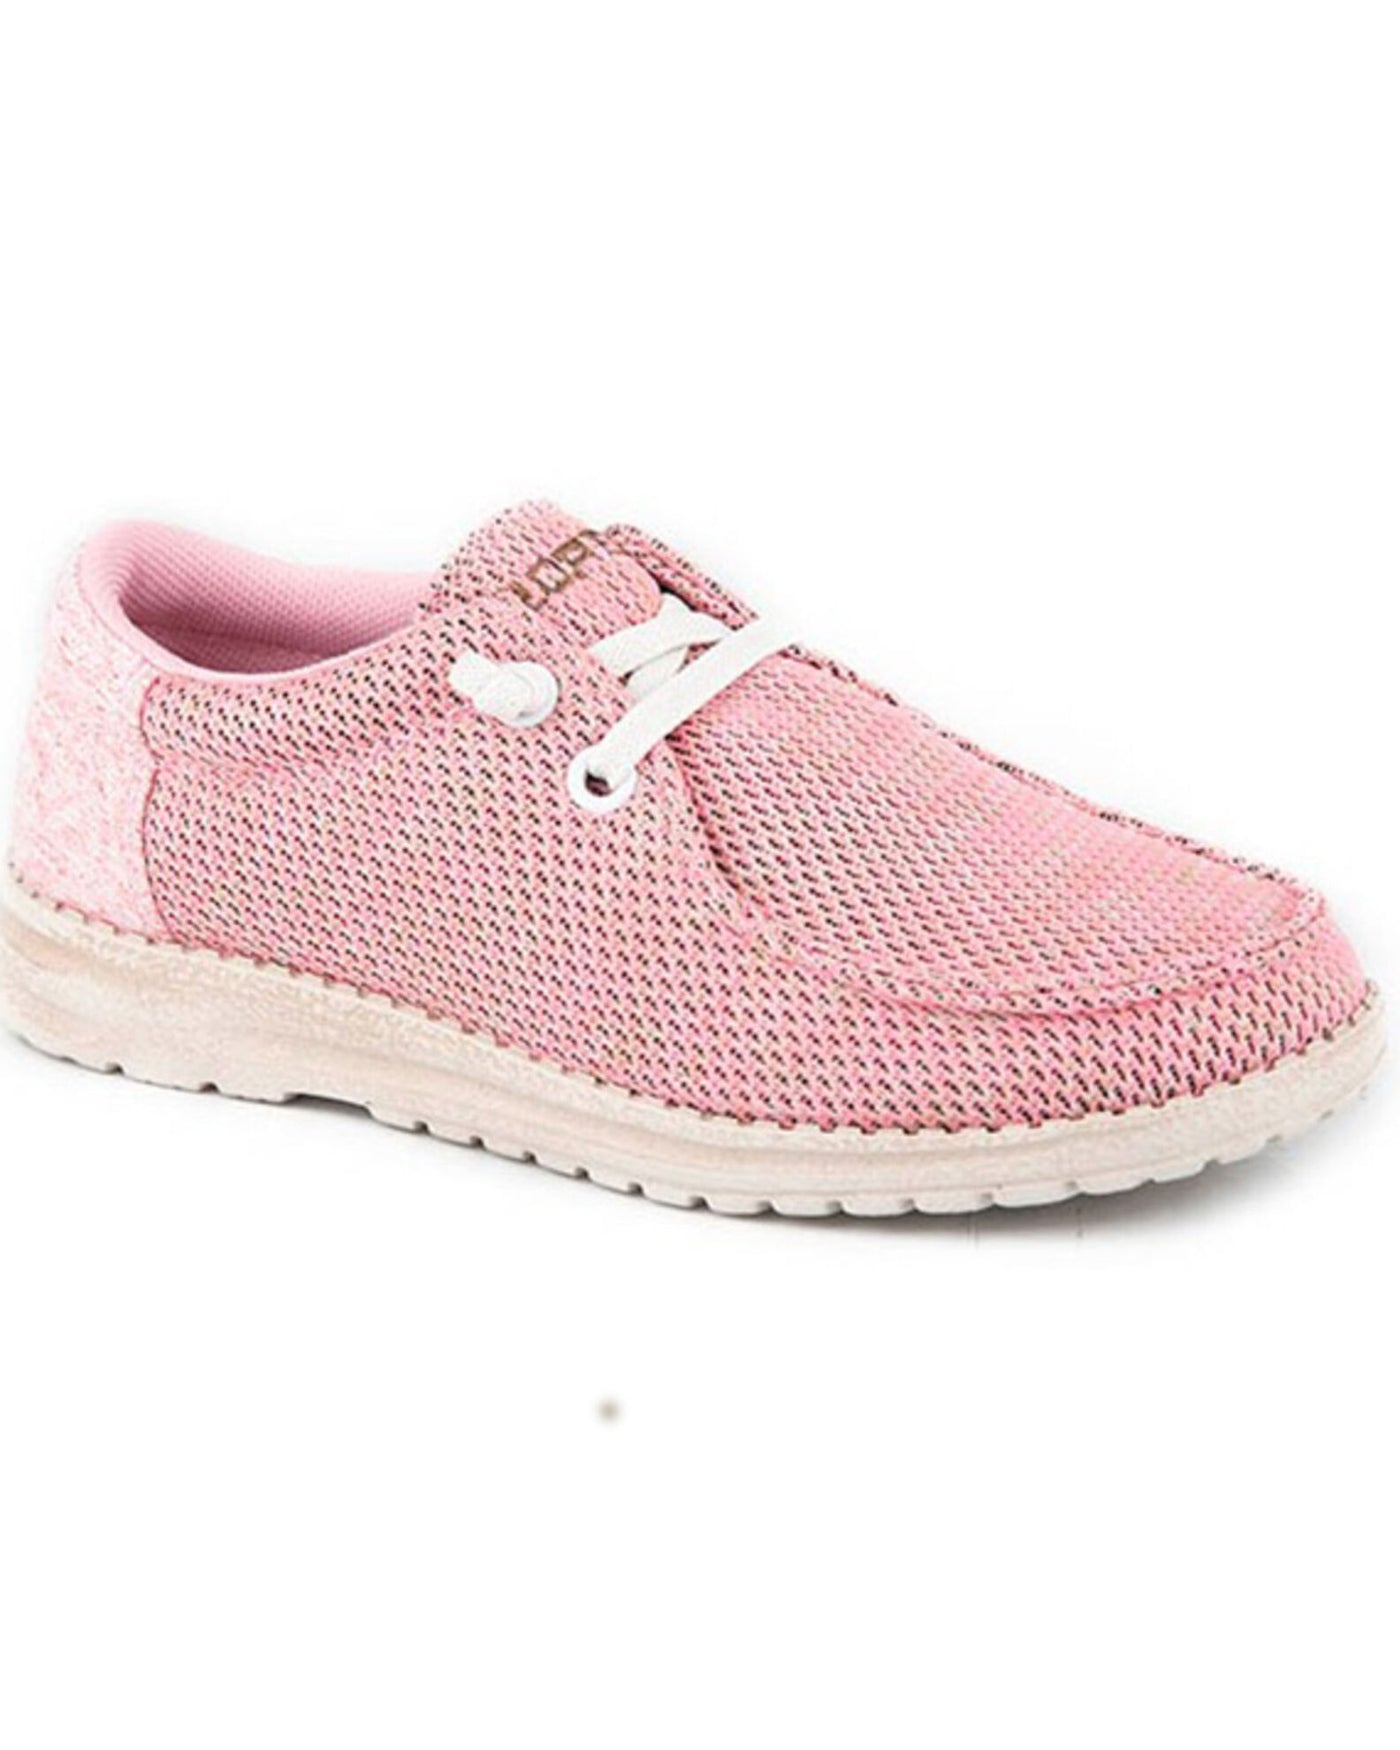 Roper Little Girl's Hang Loose Pink Casual Shoes-Moc Toe